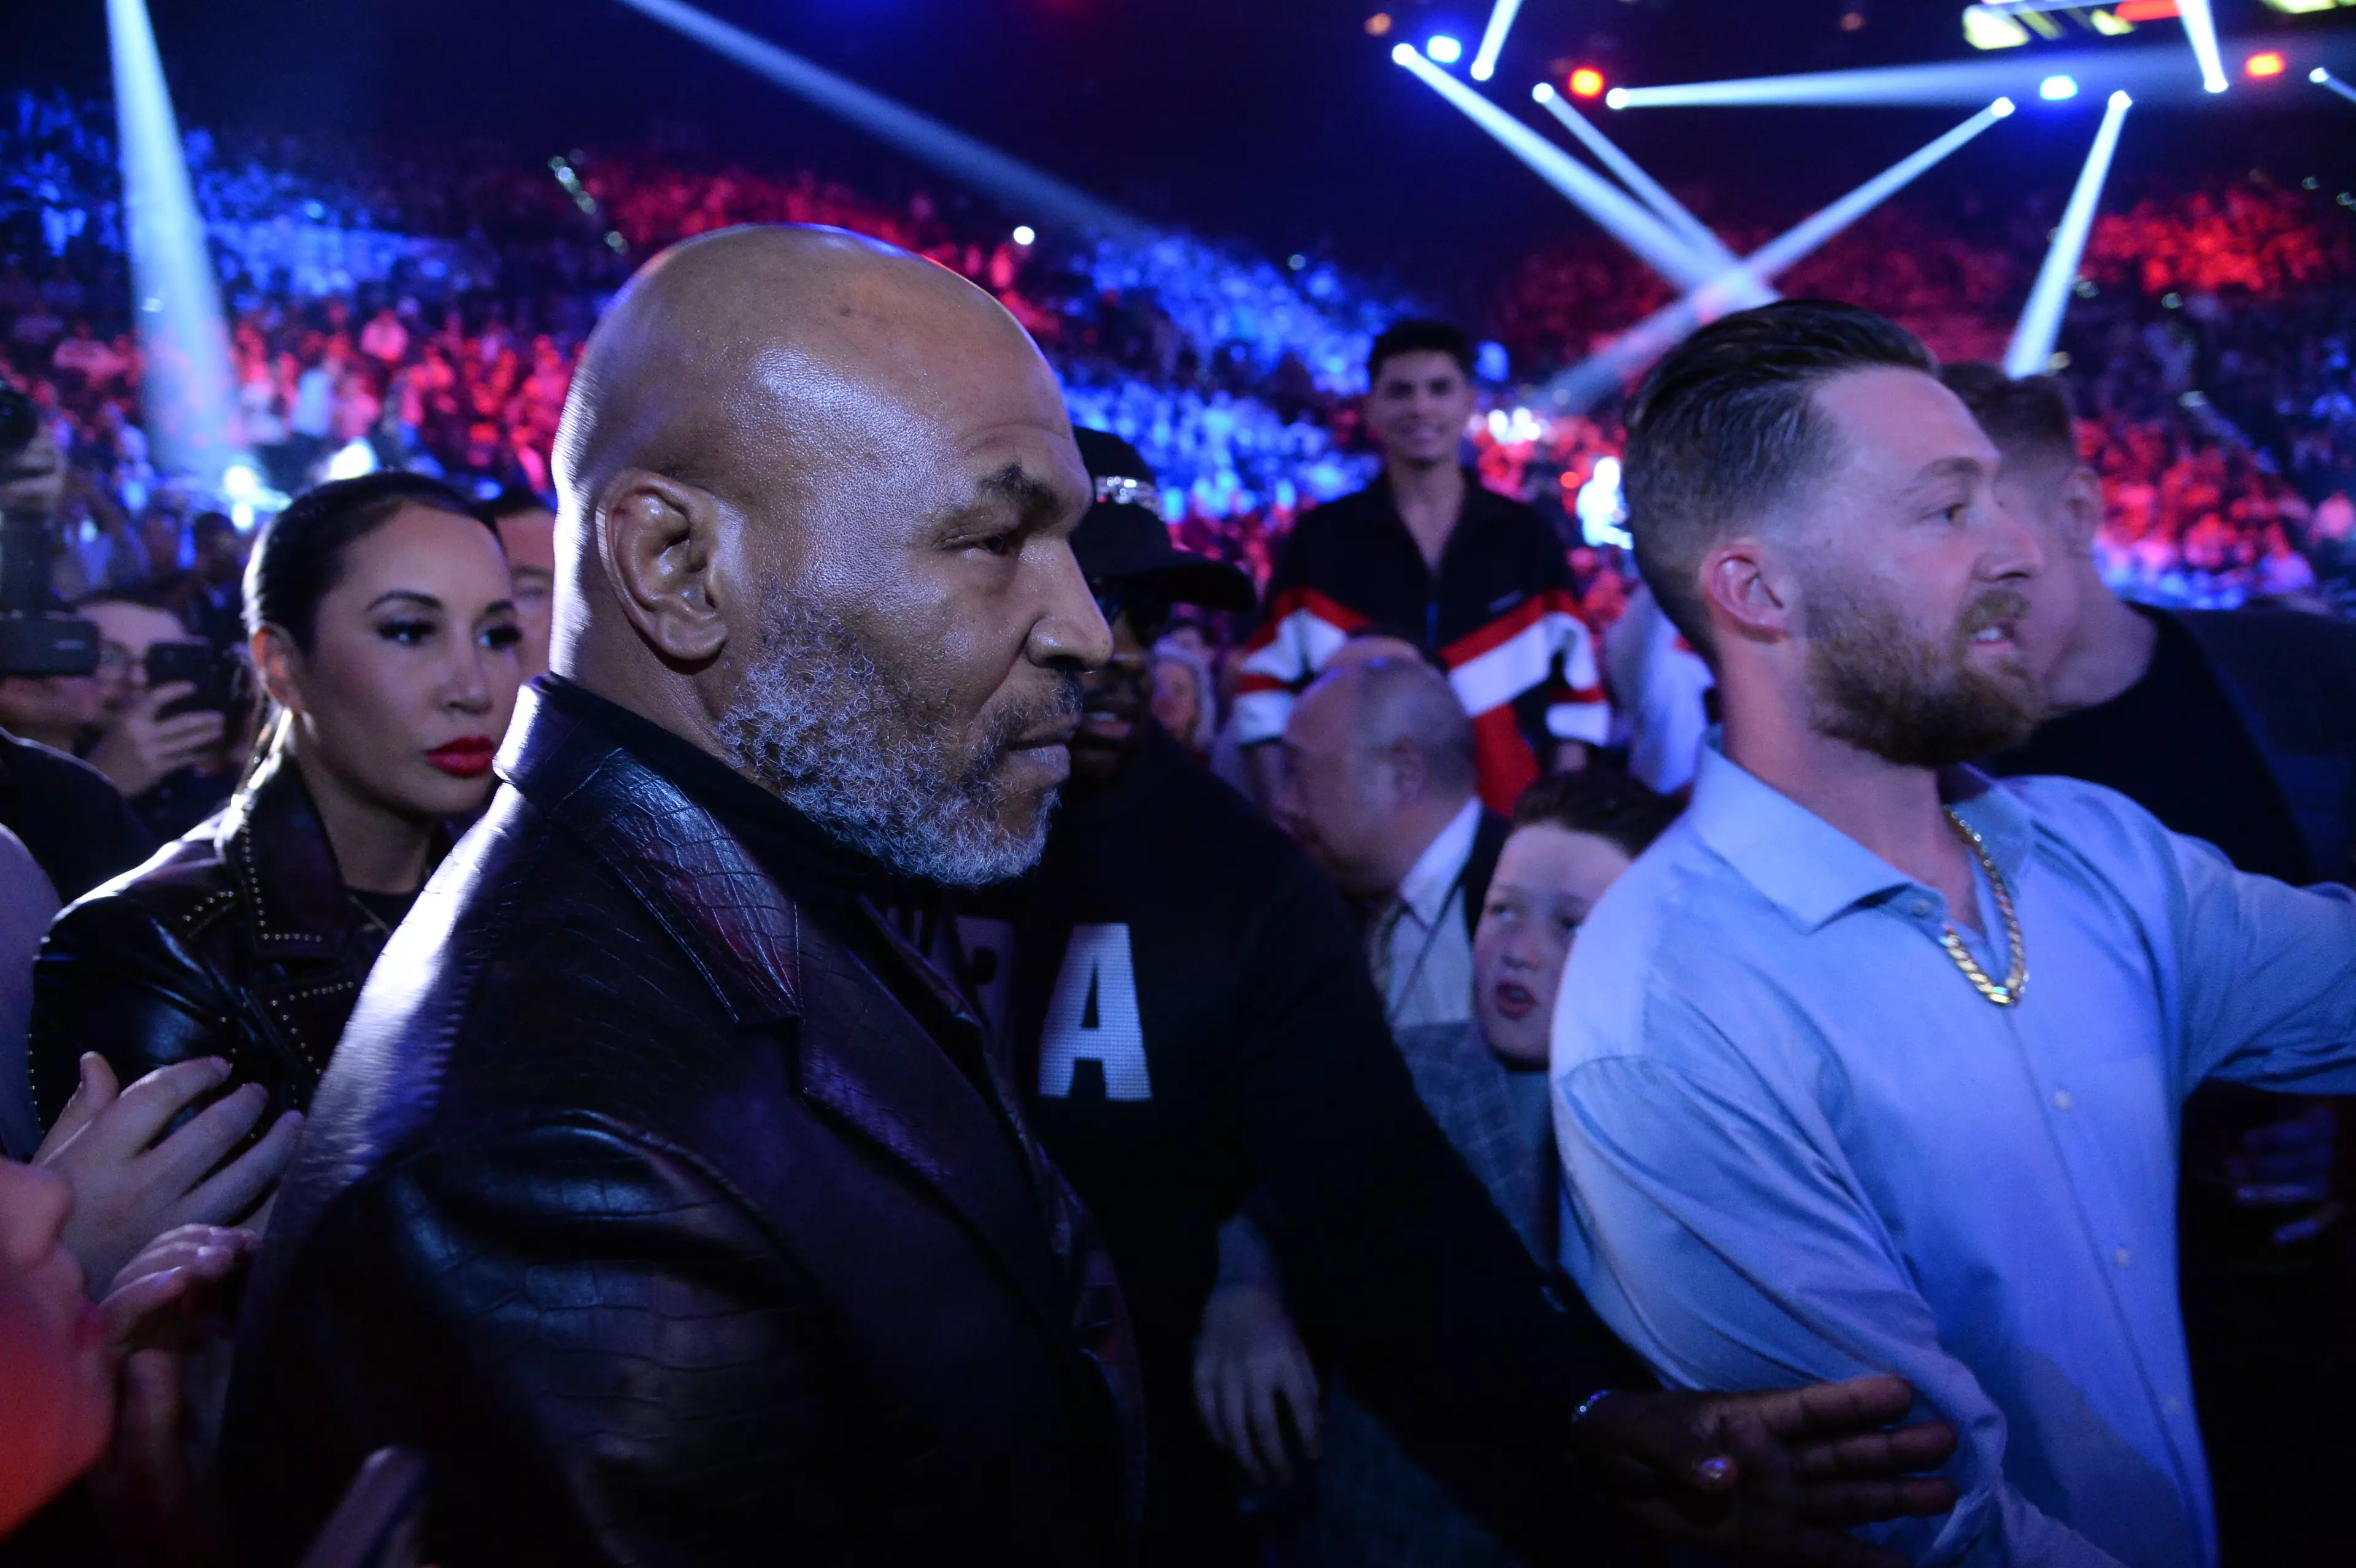 Tyson takes in Tyson Fury's victory over Deontay Wilder earlier this year. Image: PA Images